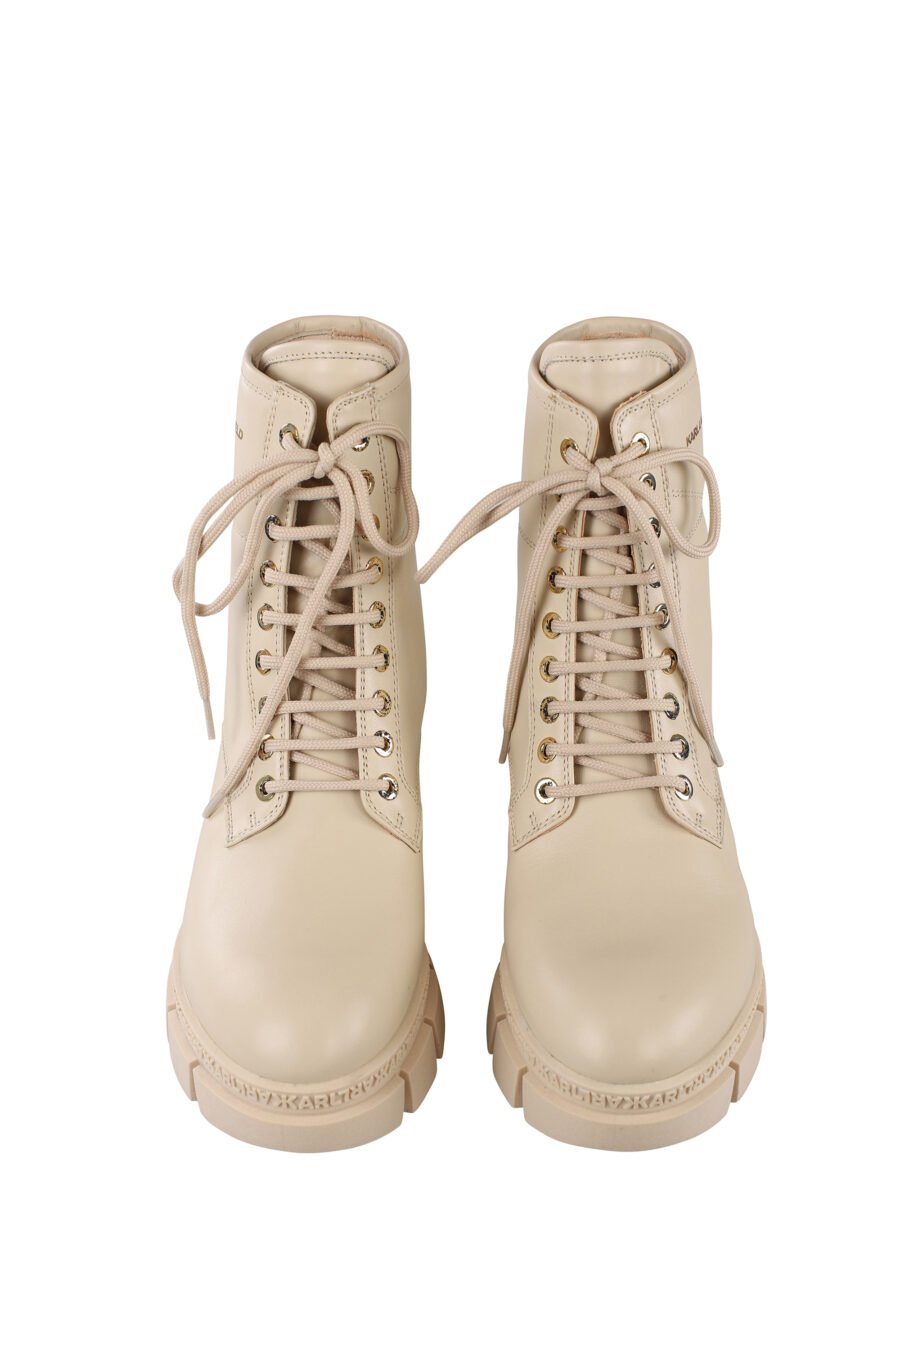 Beige lace-up ankle boots with small gold logo - IMG 6683